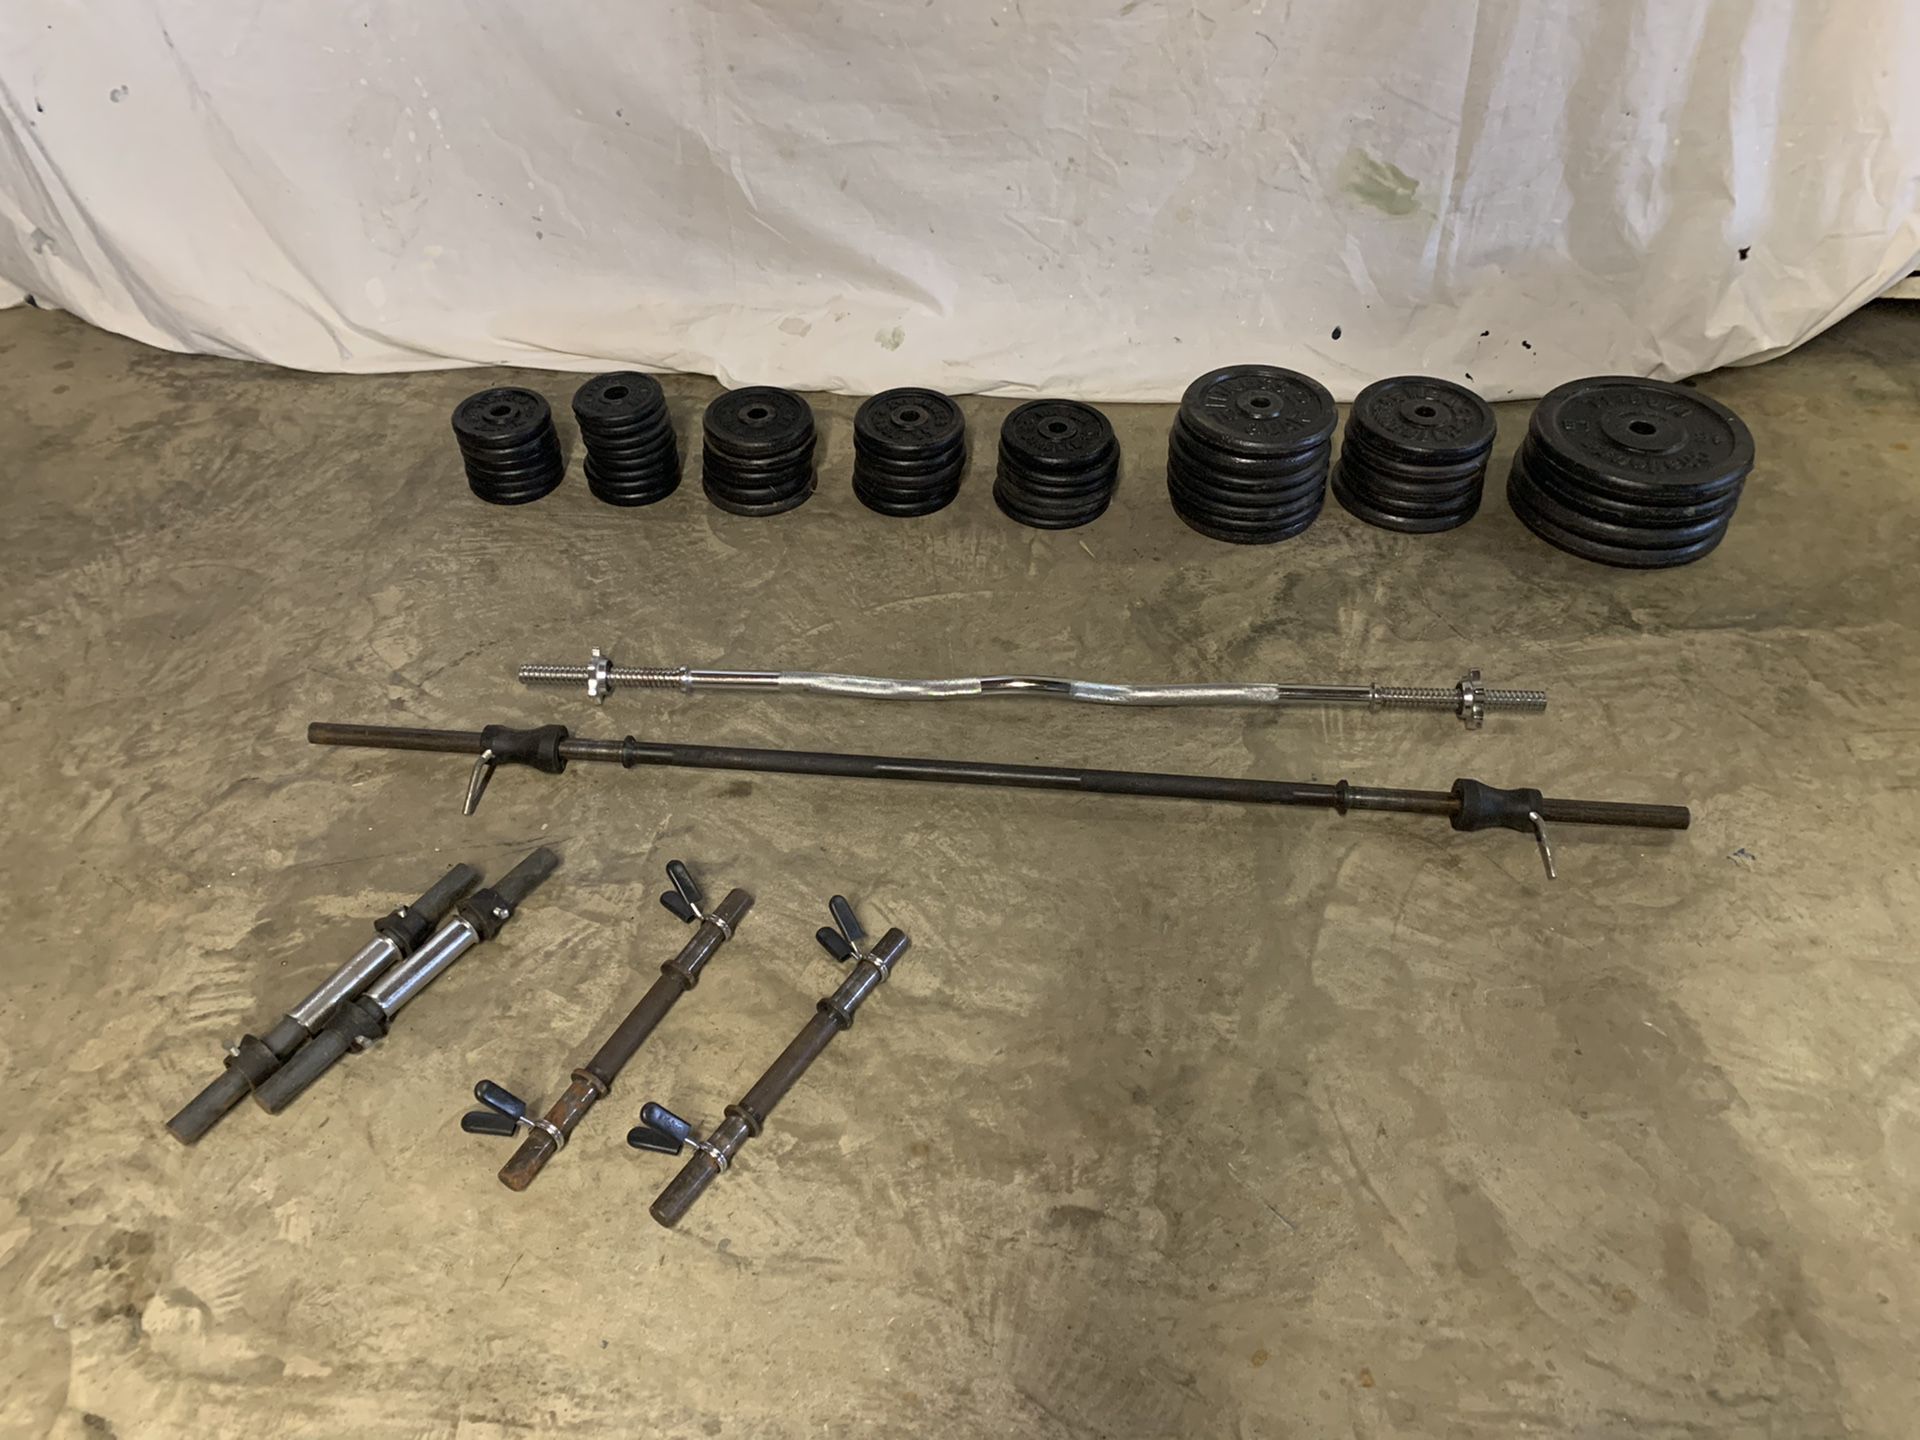 Plate Weights and Bars